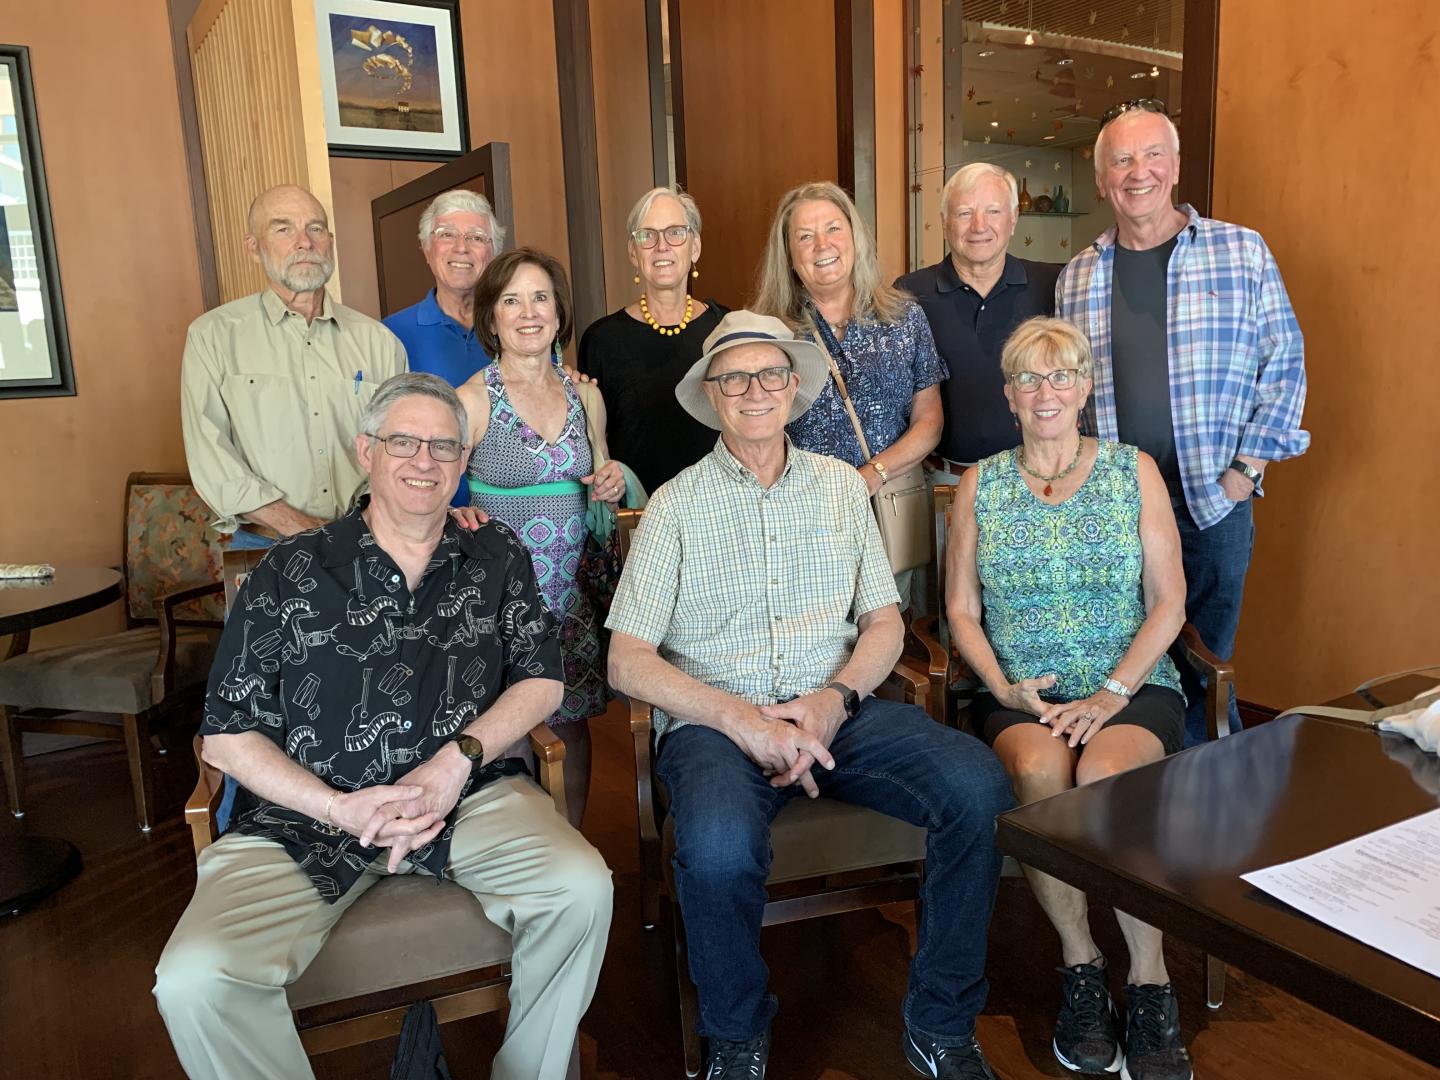 Back Row (L to R): Paul Newman, Phil Pagoria, Janet Reed, Joyce Cheney, Nancy McElroy, Wayne Bromley, Max HannamFront Row: Don Rawitsch, Scott Kirkconnell, Sally Schneider